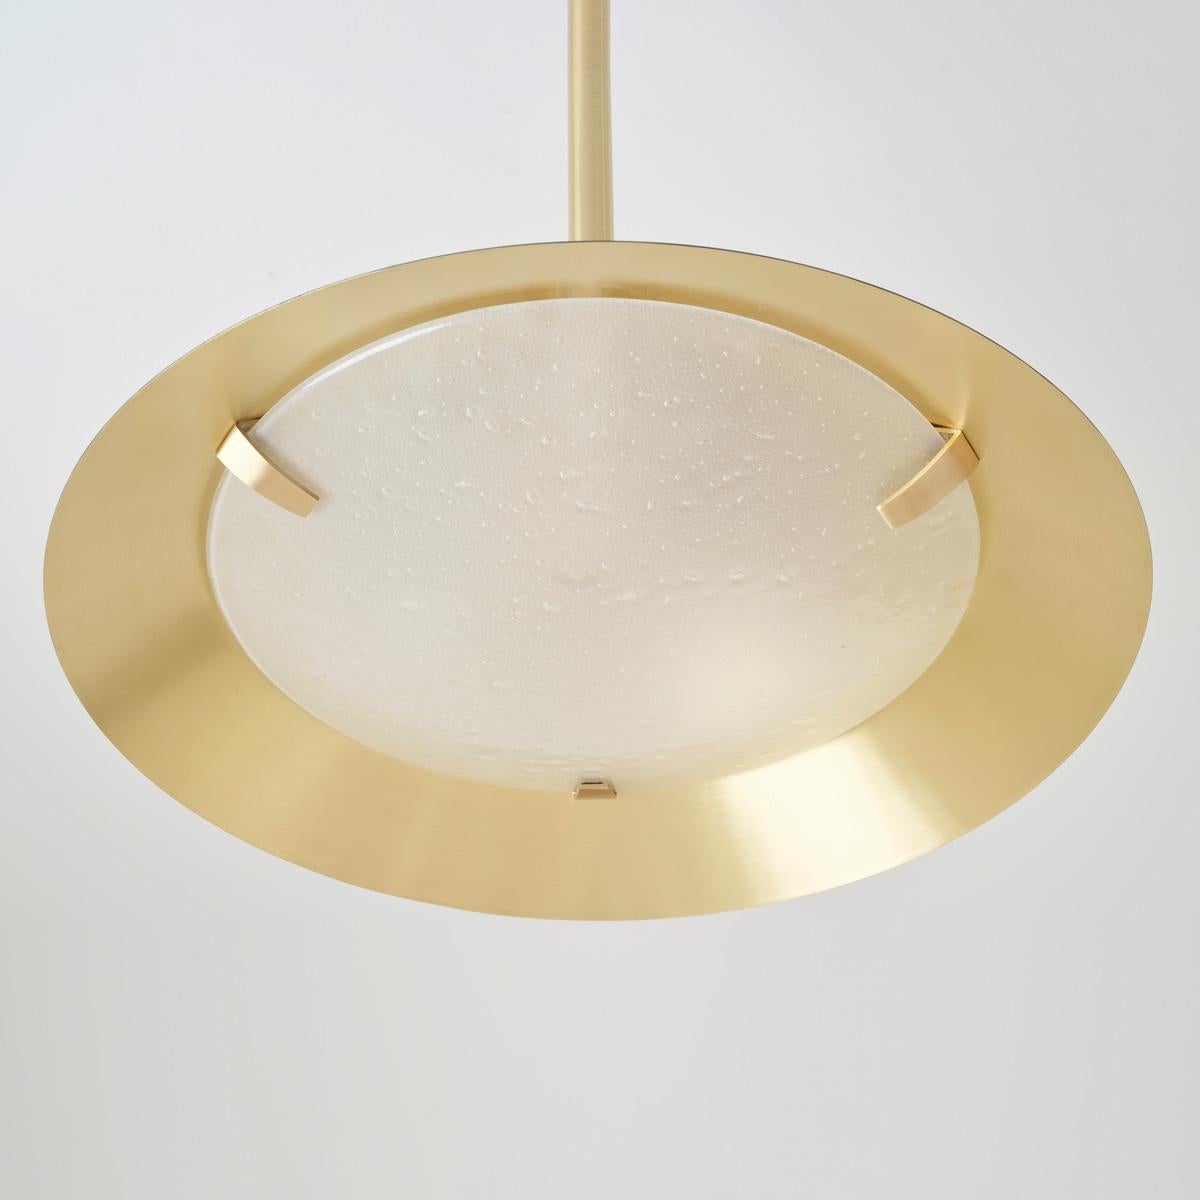 Kono Pendant by Gaspare Asaro. Satin Brass and Sand White In New Condition For Sale In New York, NY